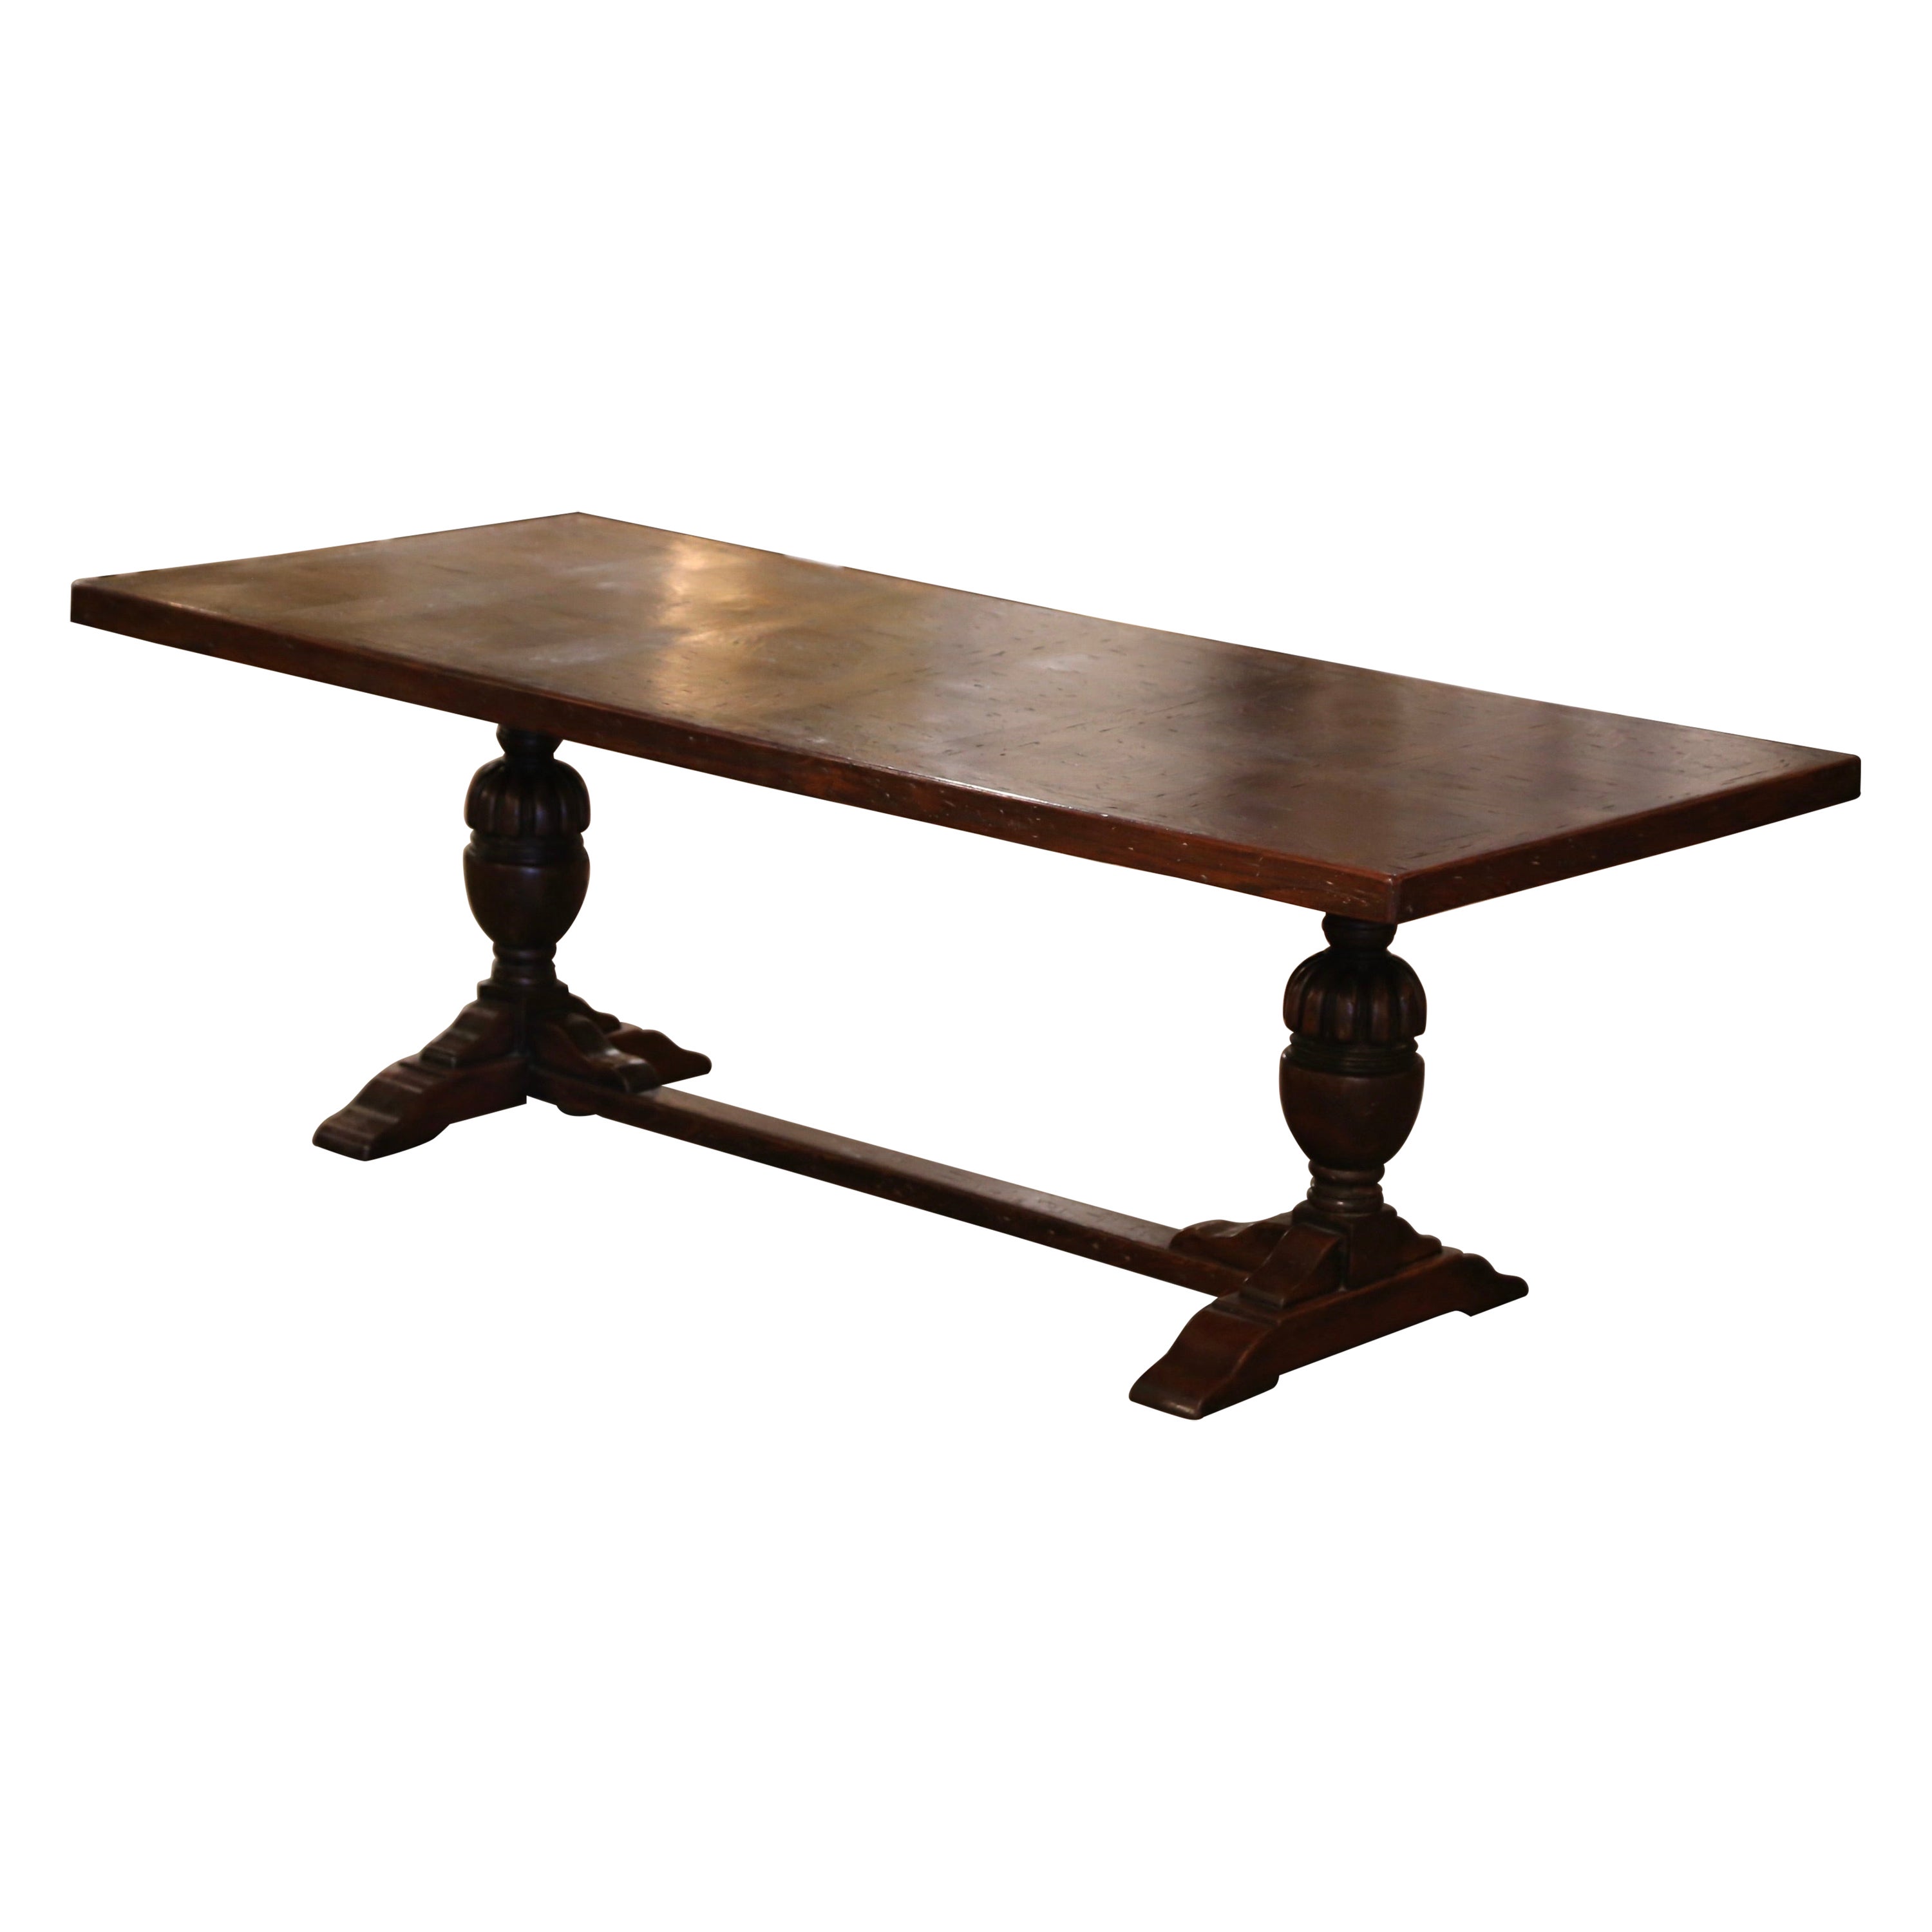  19th Century French Baroque Carved Oak Trestle Farm Table with Parquetry Top For Sale